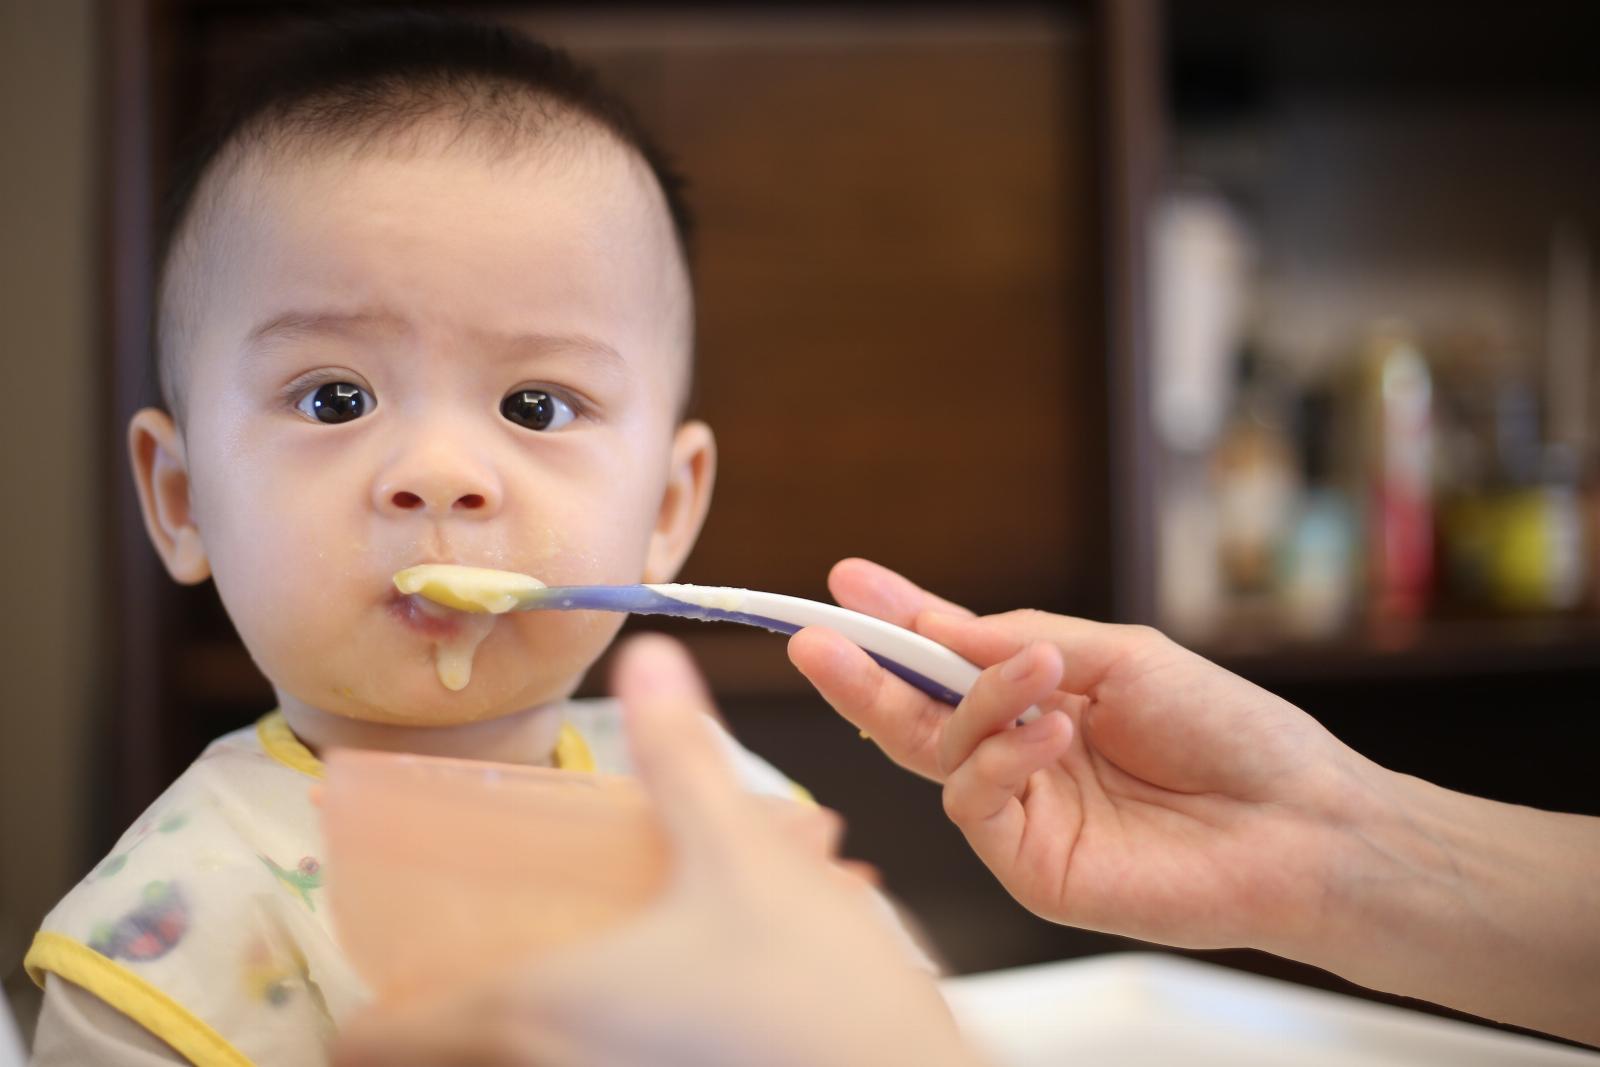 Fancy Baby Foods Claim to Protect Kids From Developing Allergies. They’re a Scam.